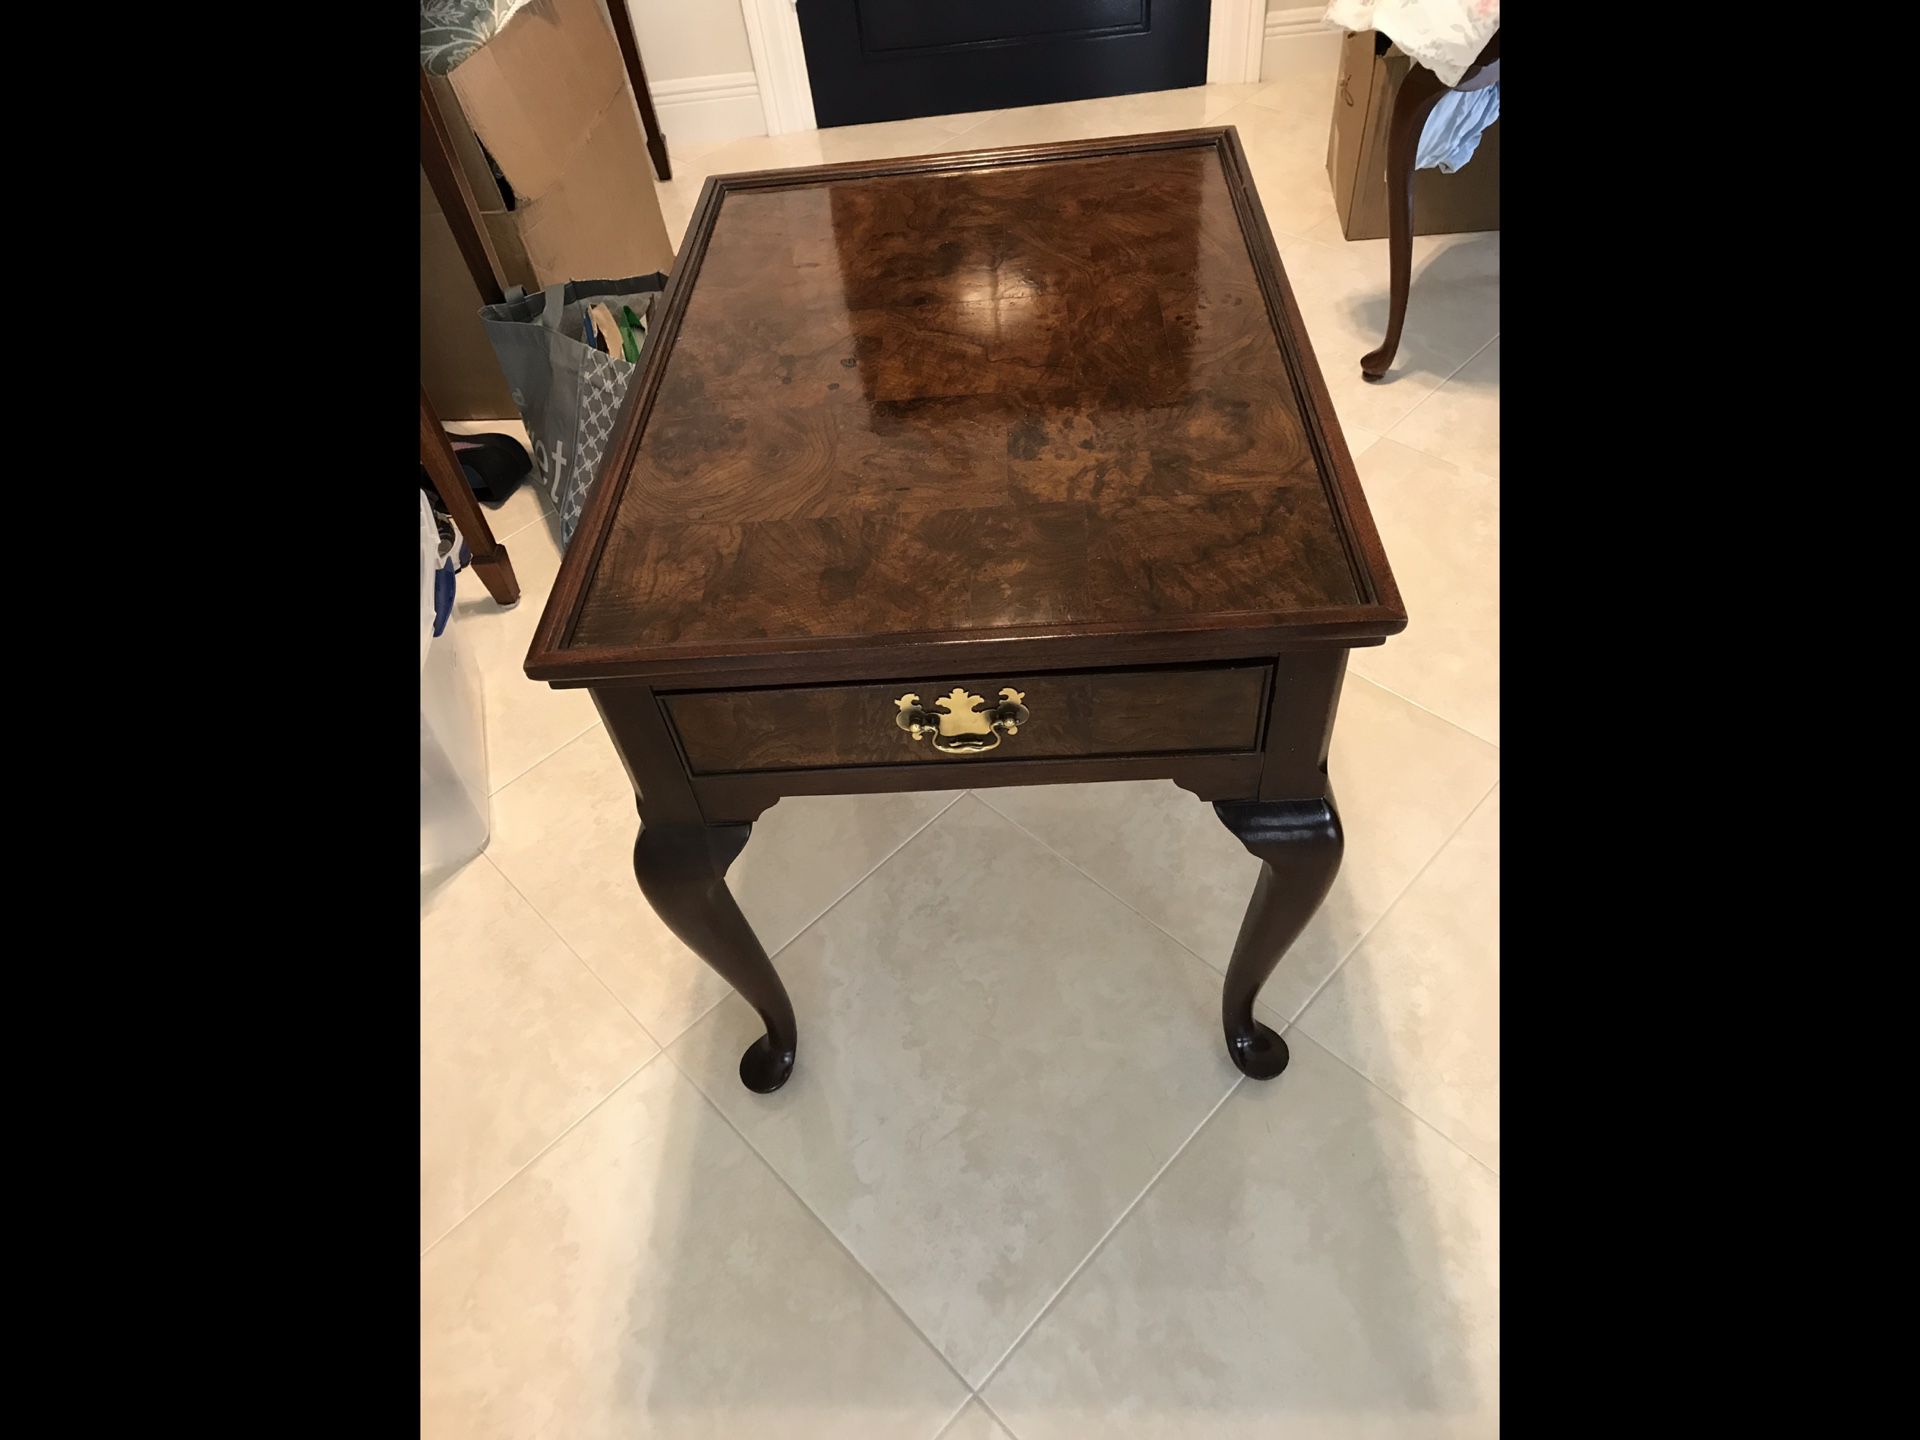 Two absolutely beautiful Hekman high end Country French style tables